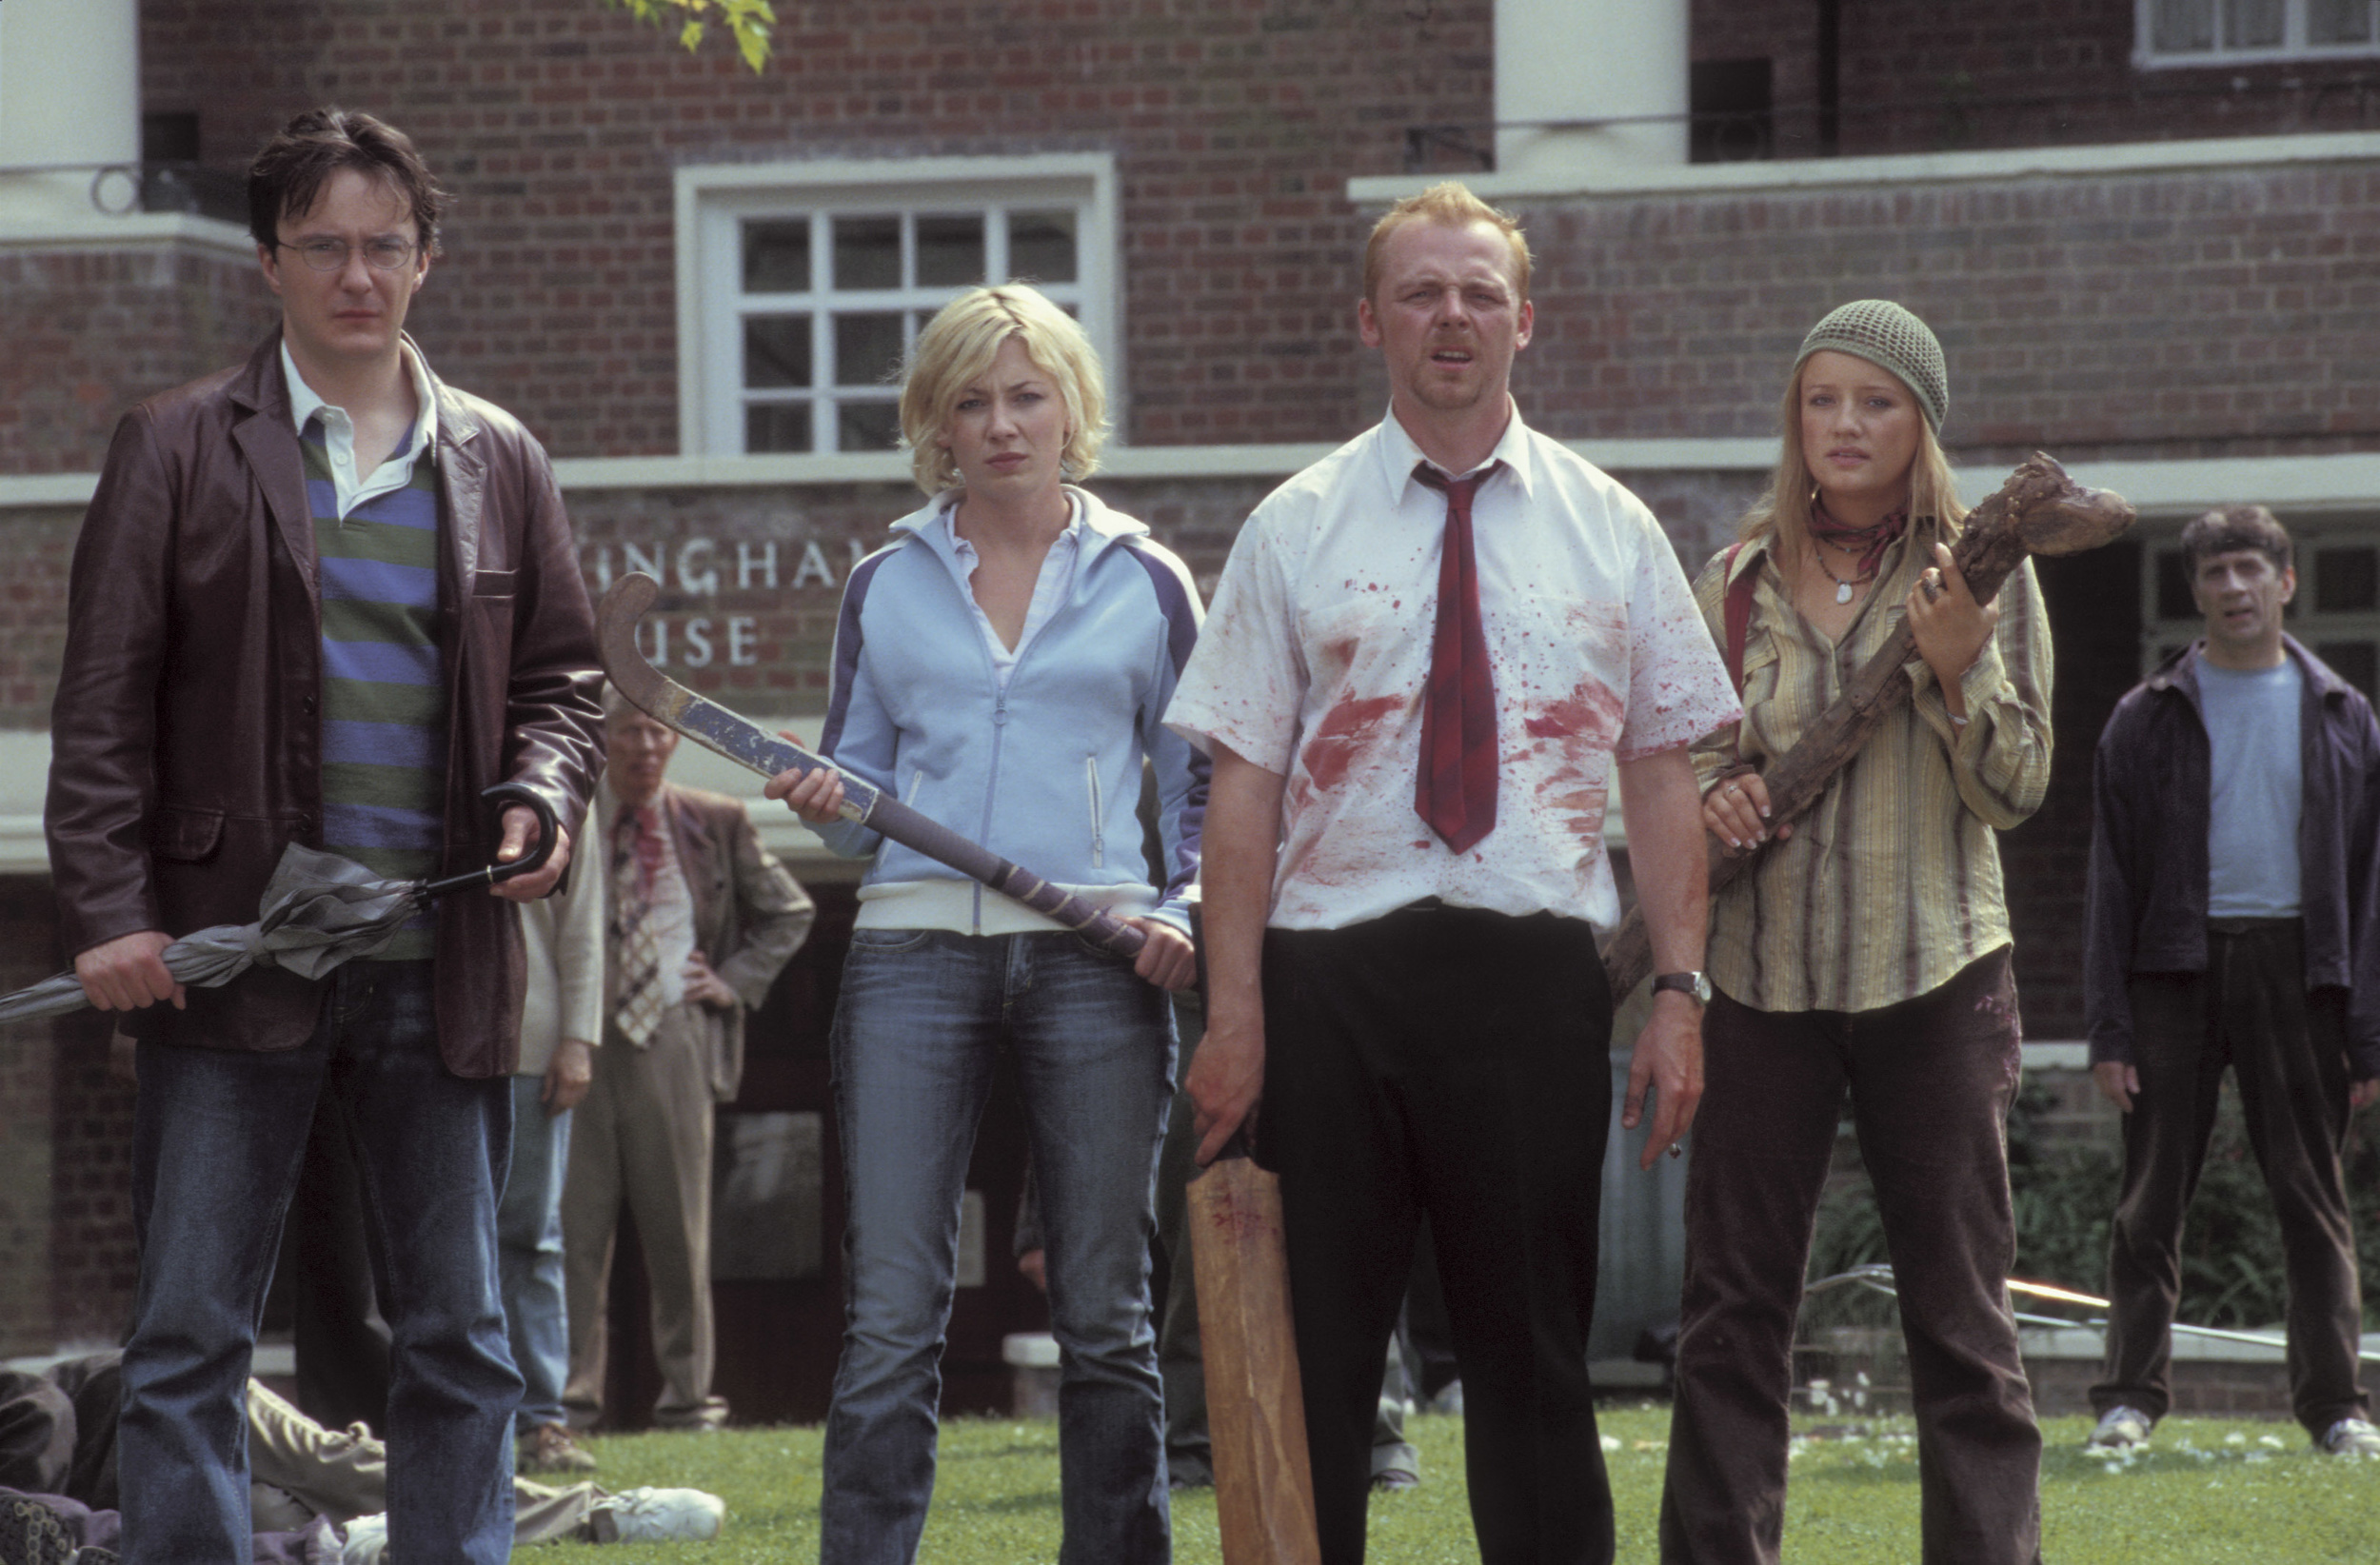 <p>What if you woke up one day and your city had been taken over by zombies? That’s the premise of <em>Shaun of the Dead</em>. The movie was a breakout project for director Edgar Wright and star Simon Pegg. It’s a letter-perfect horror-comedy, bringing the gore and the laughs in equal measure.</p><p>You may also like: <a href='https://www.yardbarker.com/entertainment/articles/the_25_best_cult_classic_films_of_all_time/s1__38547554'>The 25 best cult classic films of all time</a></p>